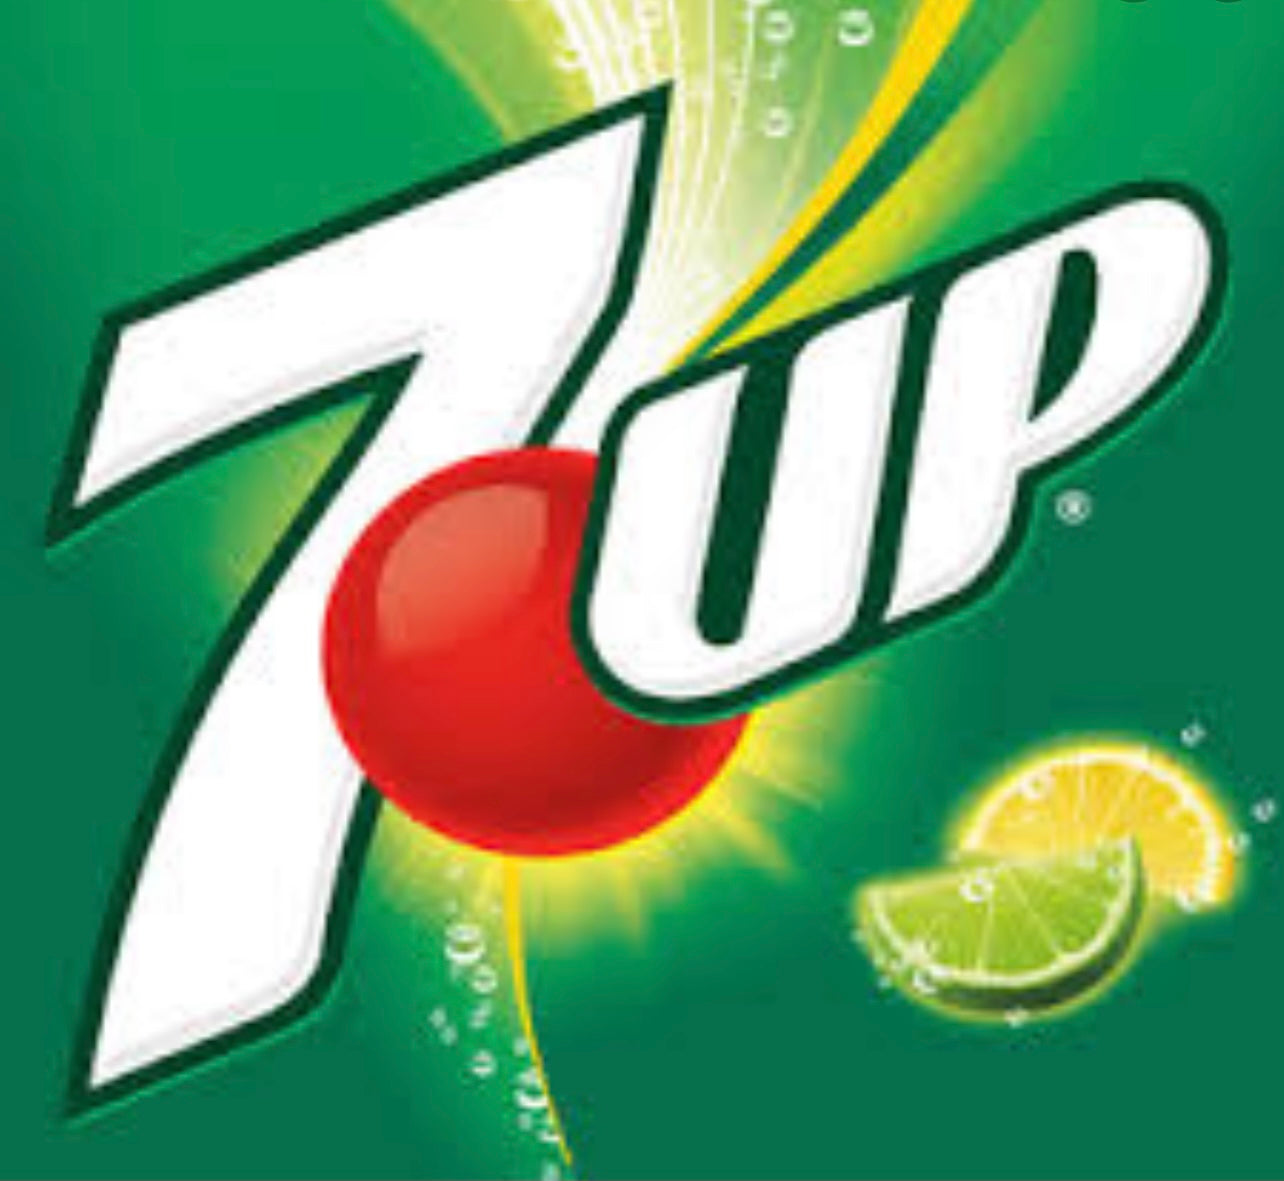 Seven up